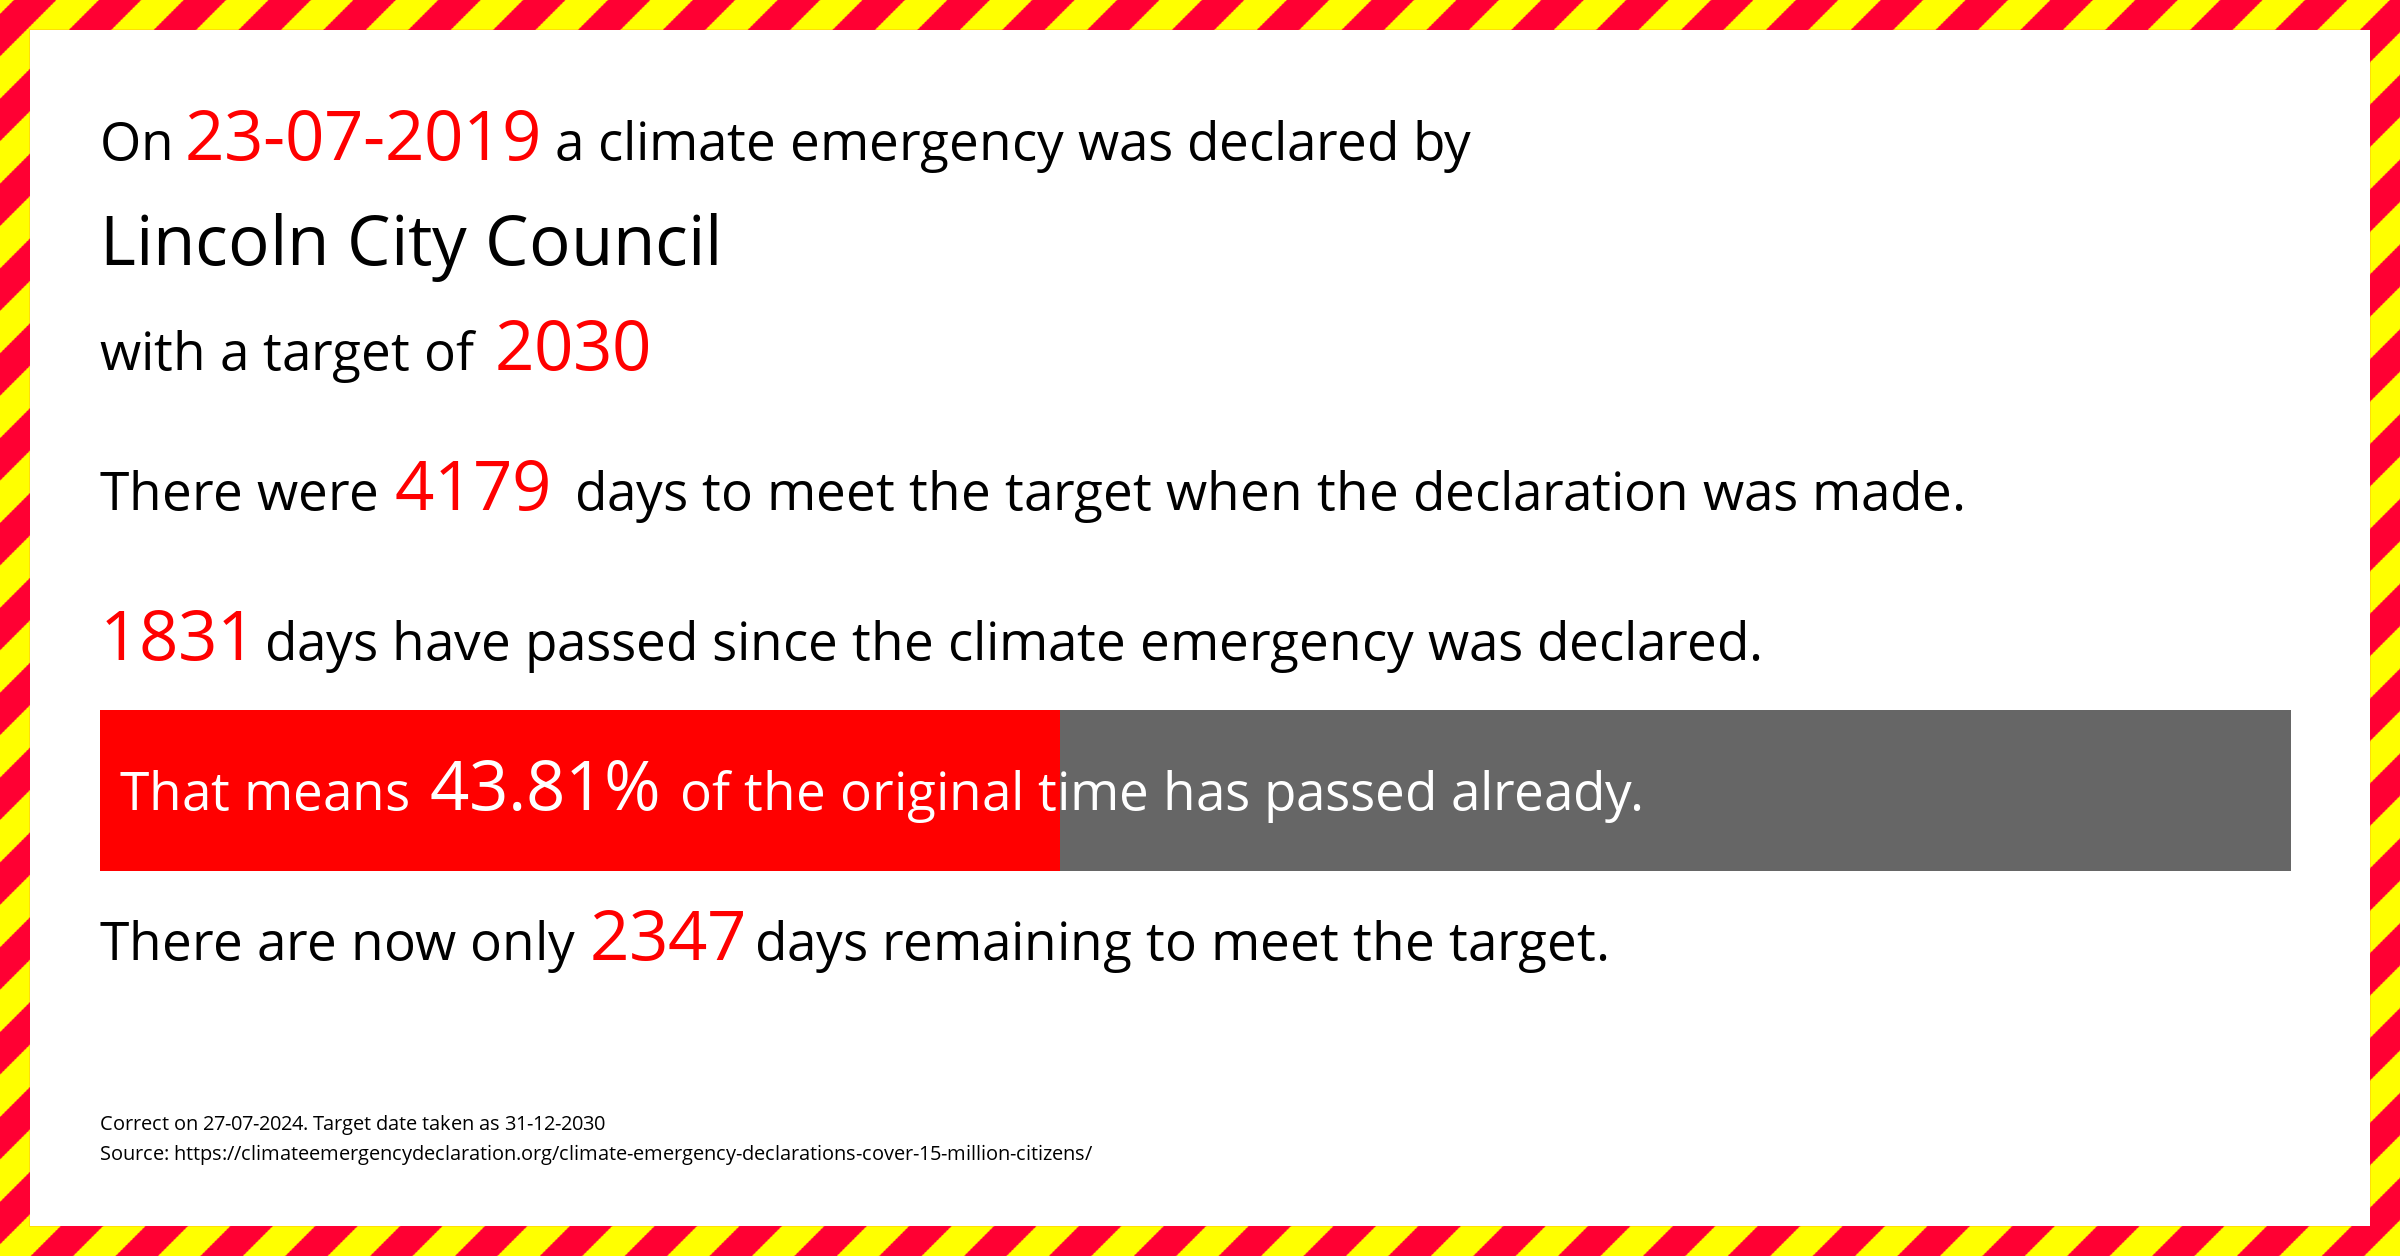 Lincoln City Council declared a Climate emergency on Tuesday 23rd July 2019, with a target of 2030.